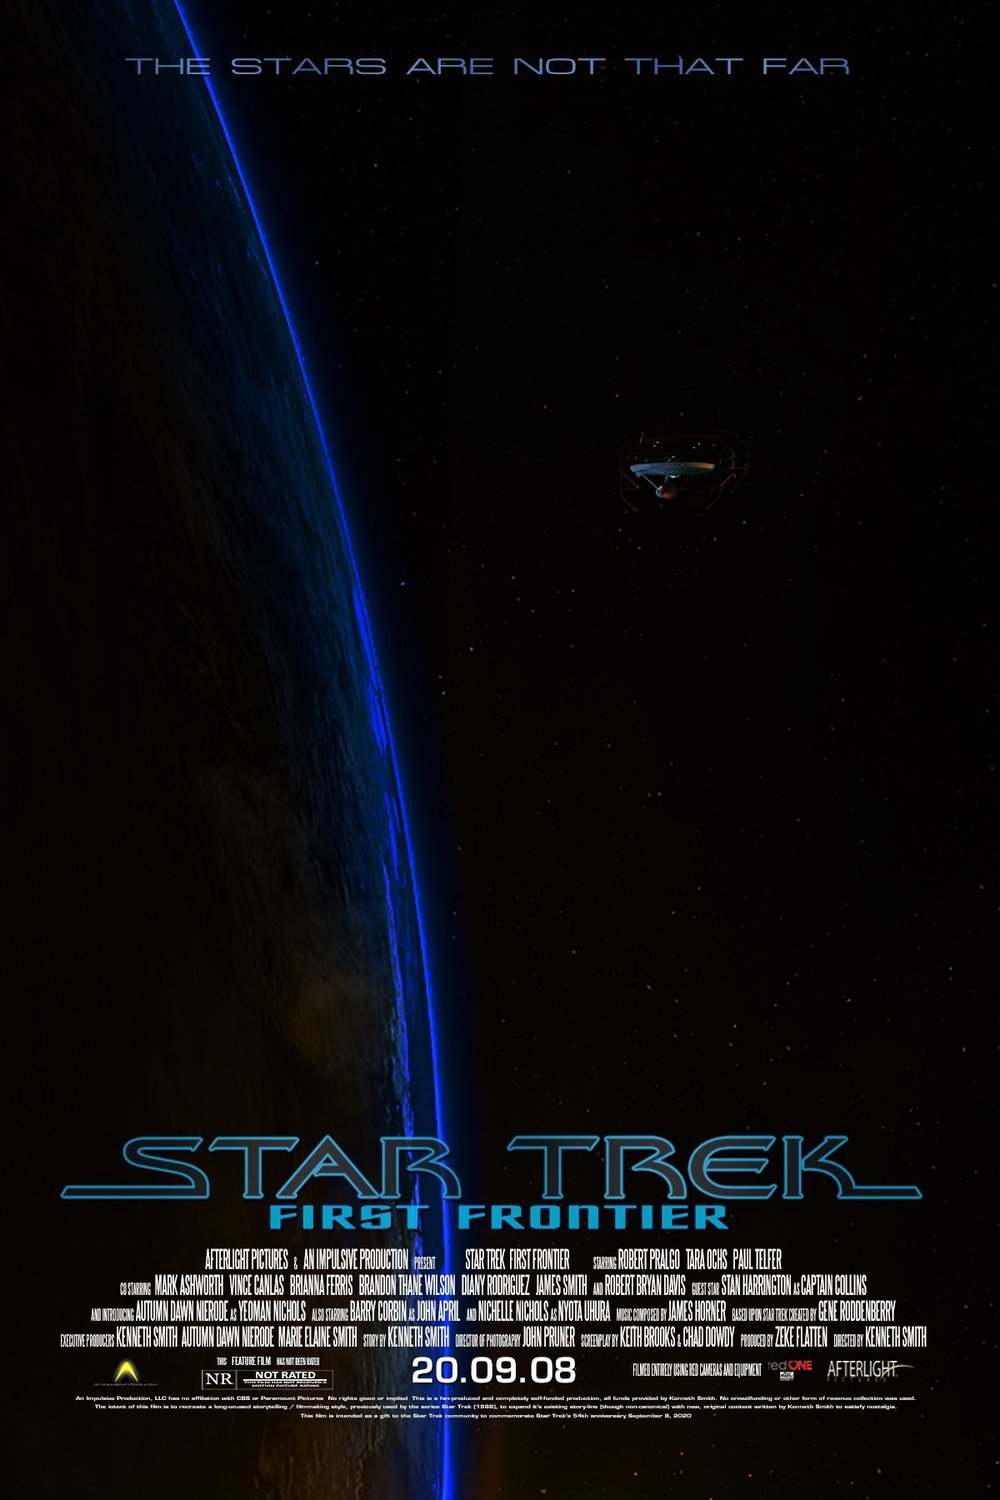 Poster of the movie Star Trek: First Frontier